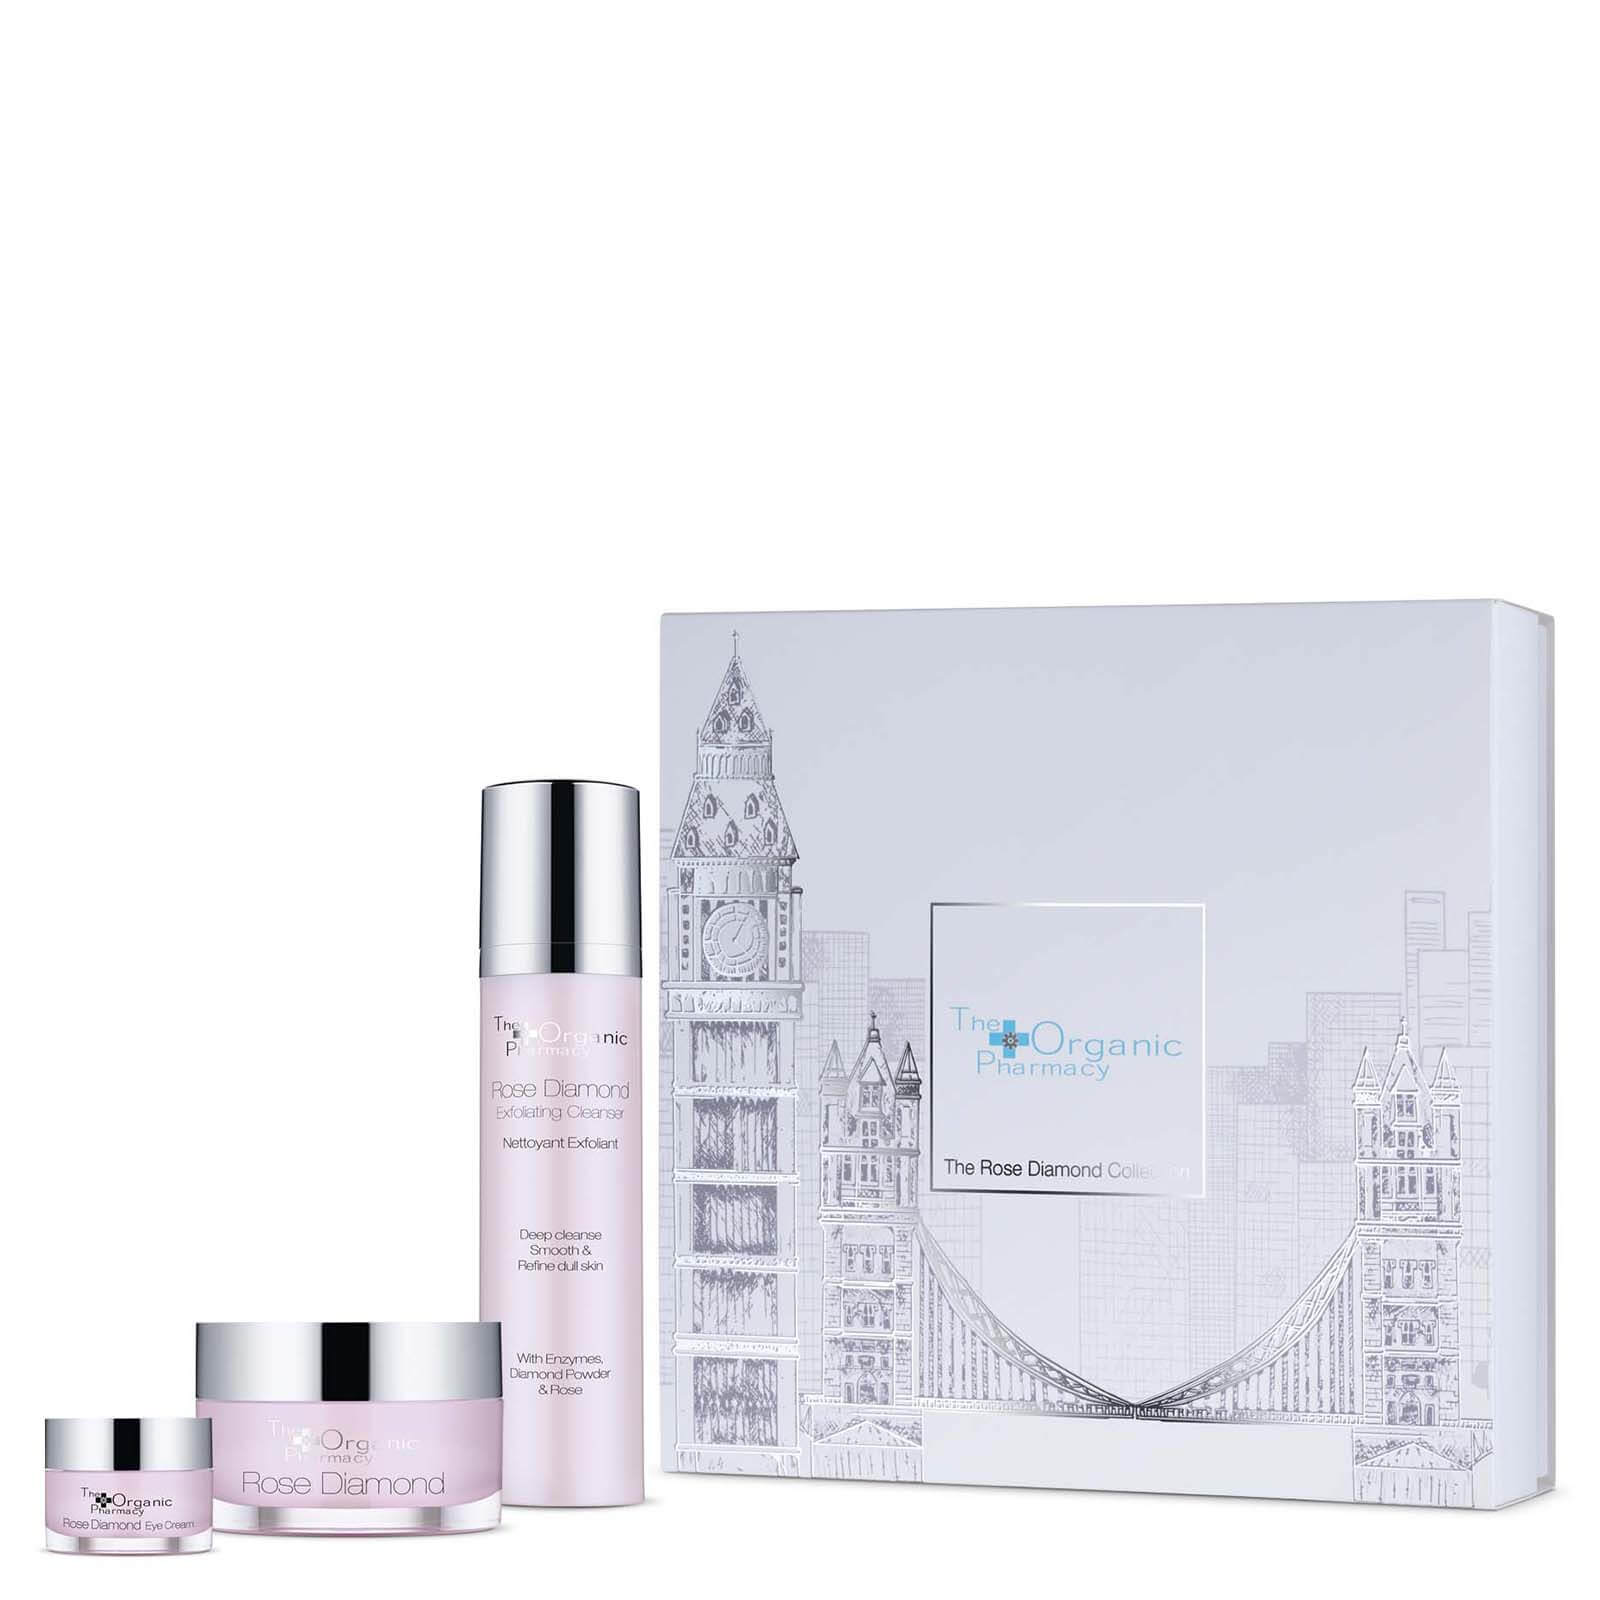 THE ORGANIC PHARMACY THE ROSE DIAMOND COLLECTION,GFRDR00030